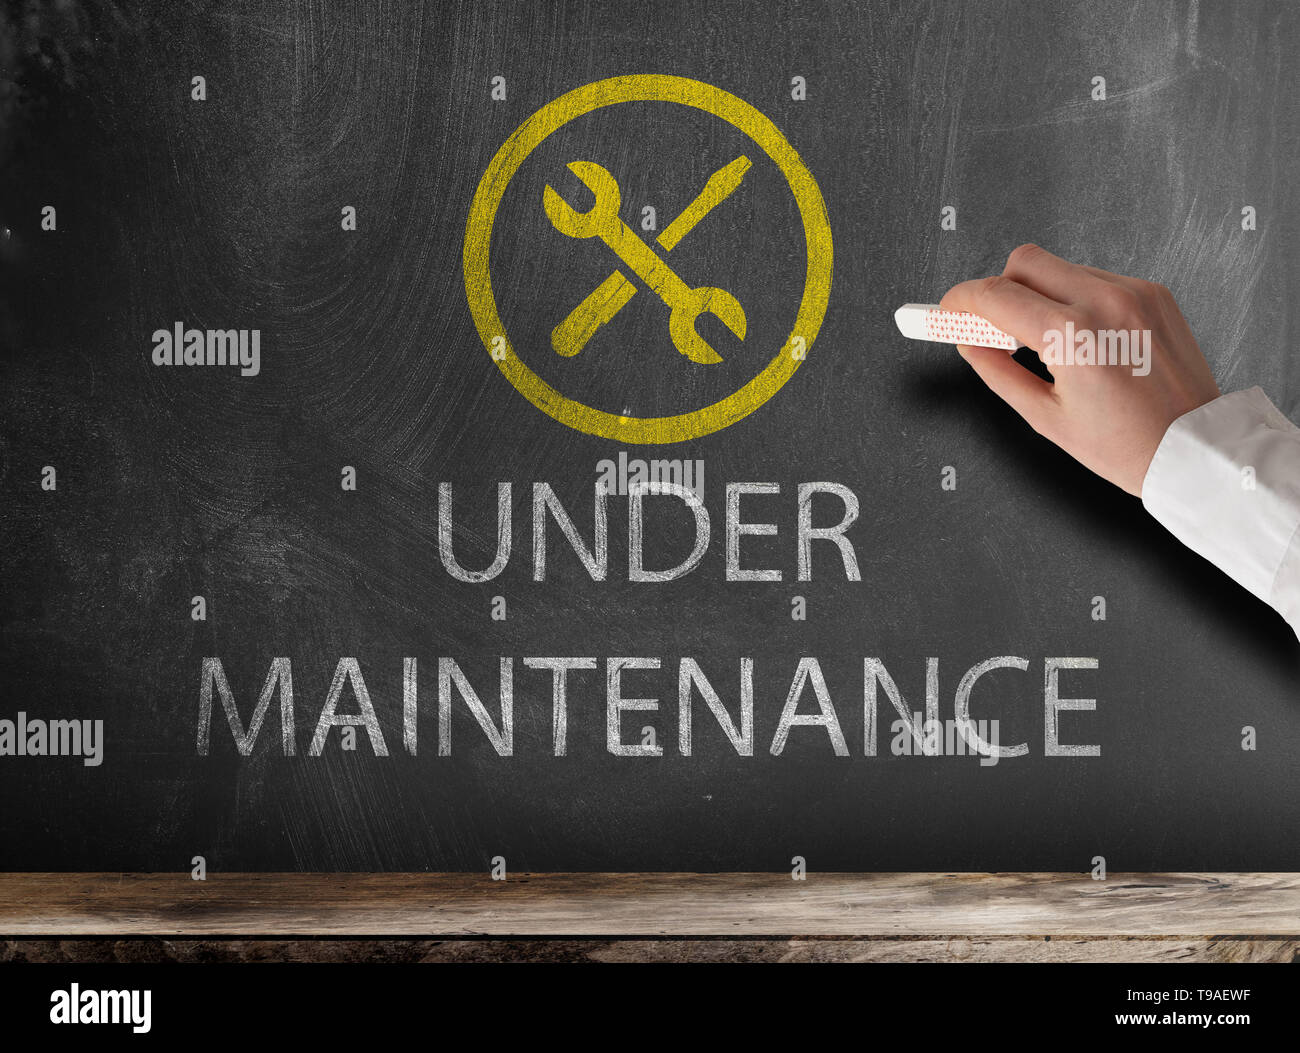 text UNDER MAINTENANCE and icon on chalkboard with hand holding piece of chalk Stock Photo